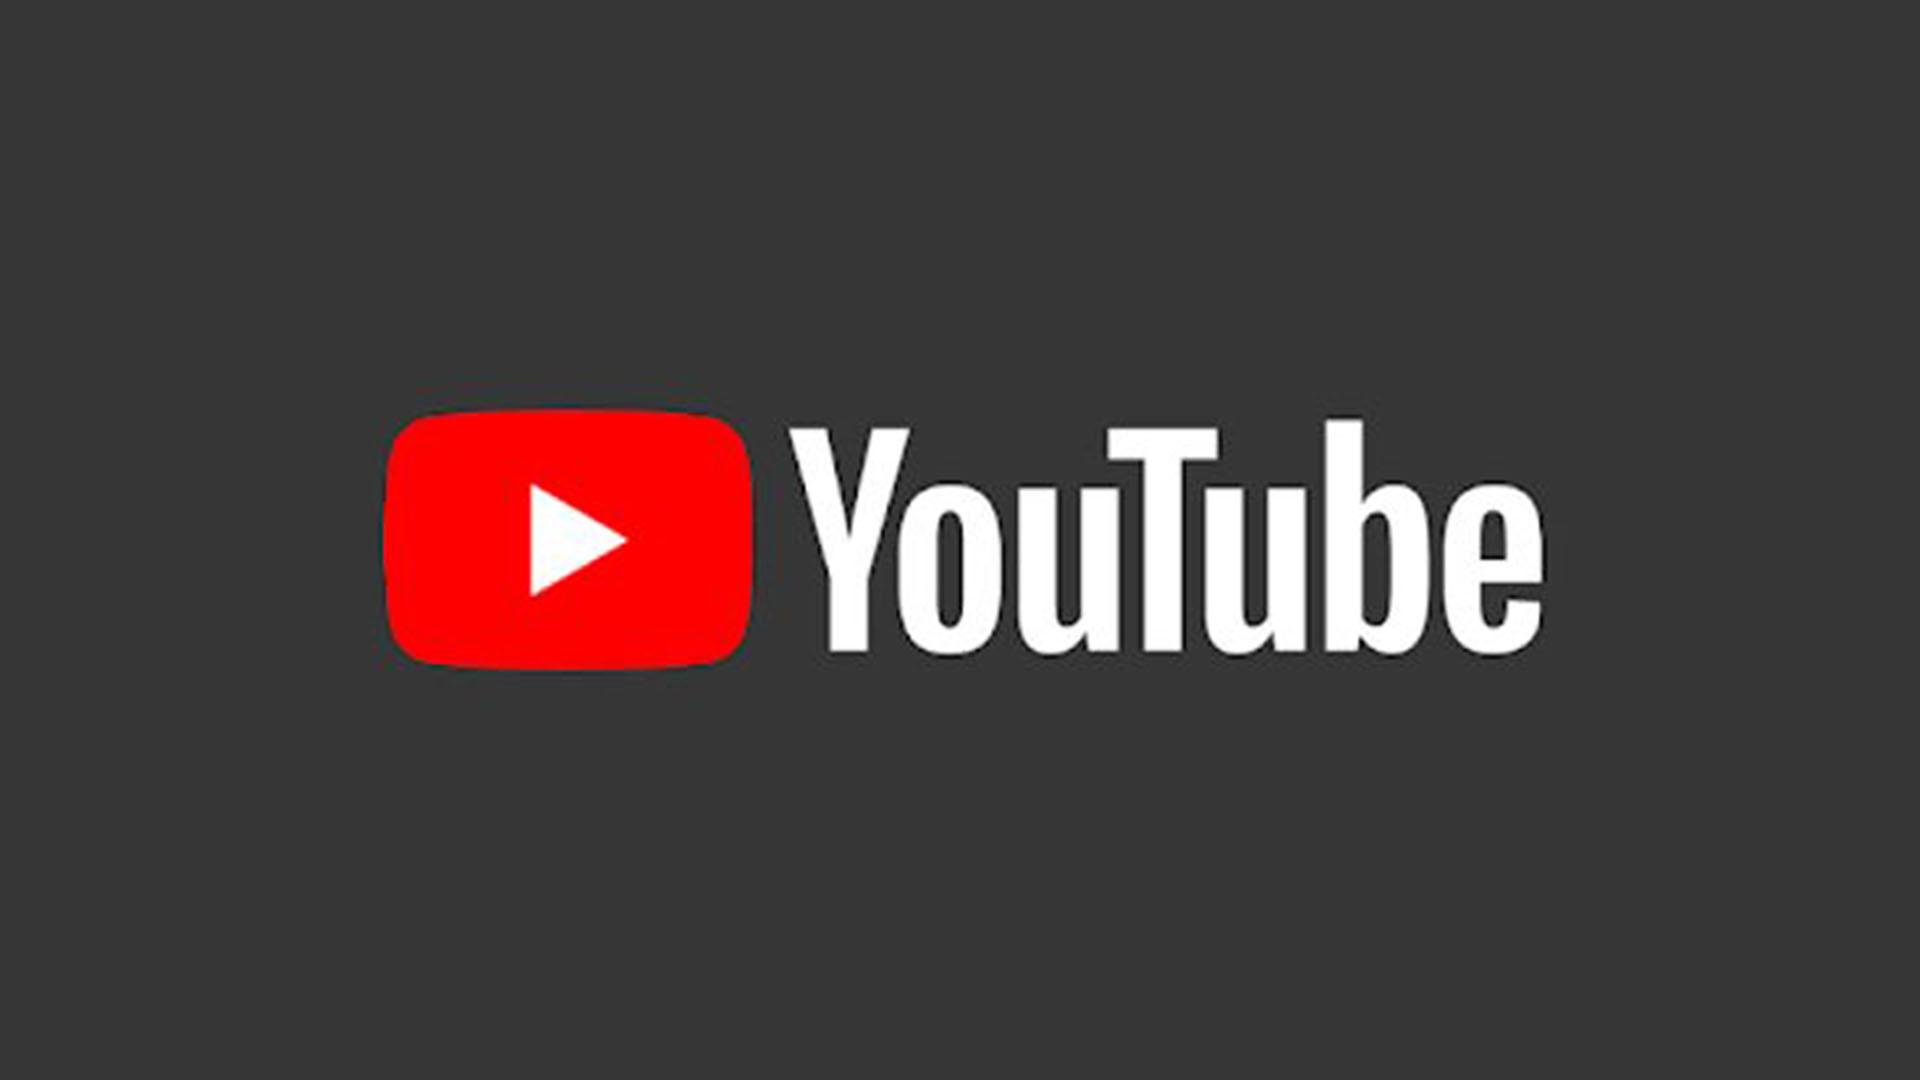 YouTube removed 11.4 million videos